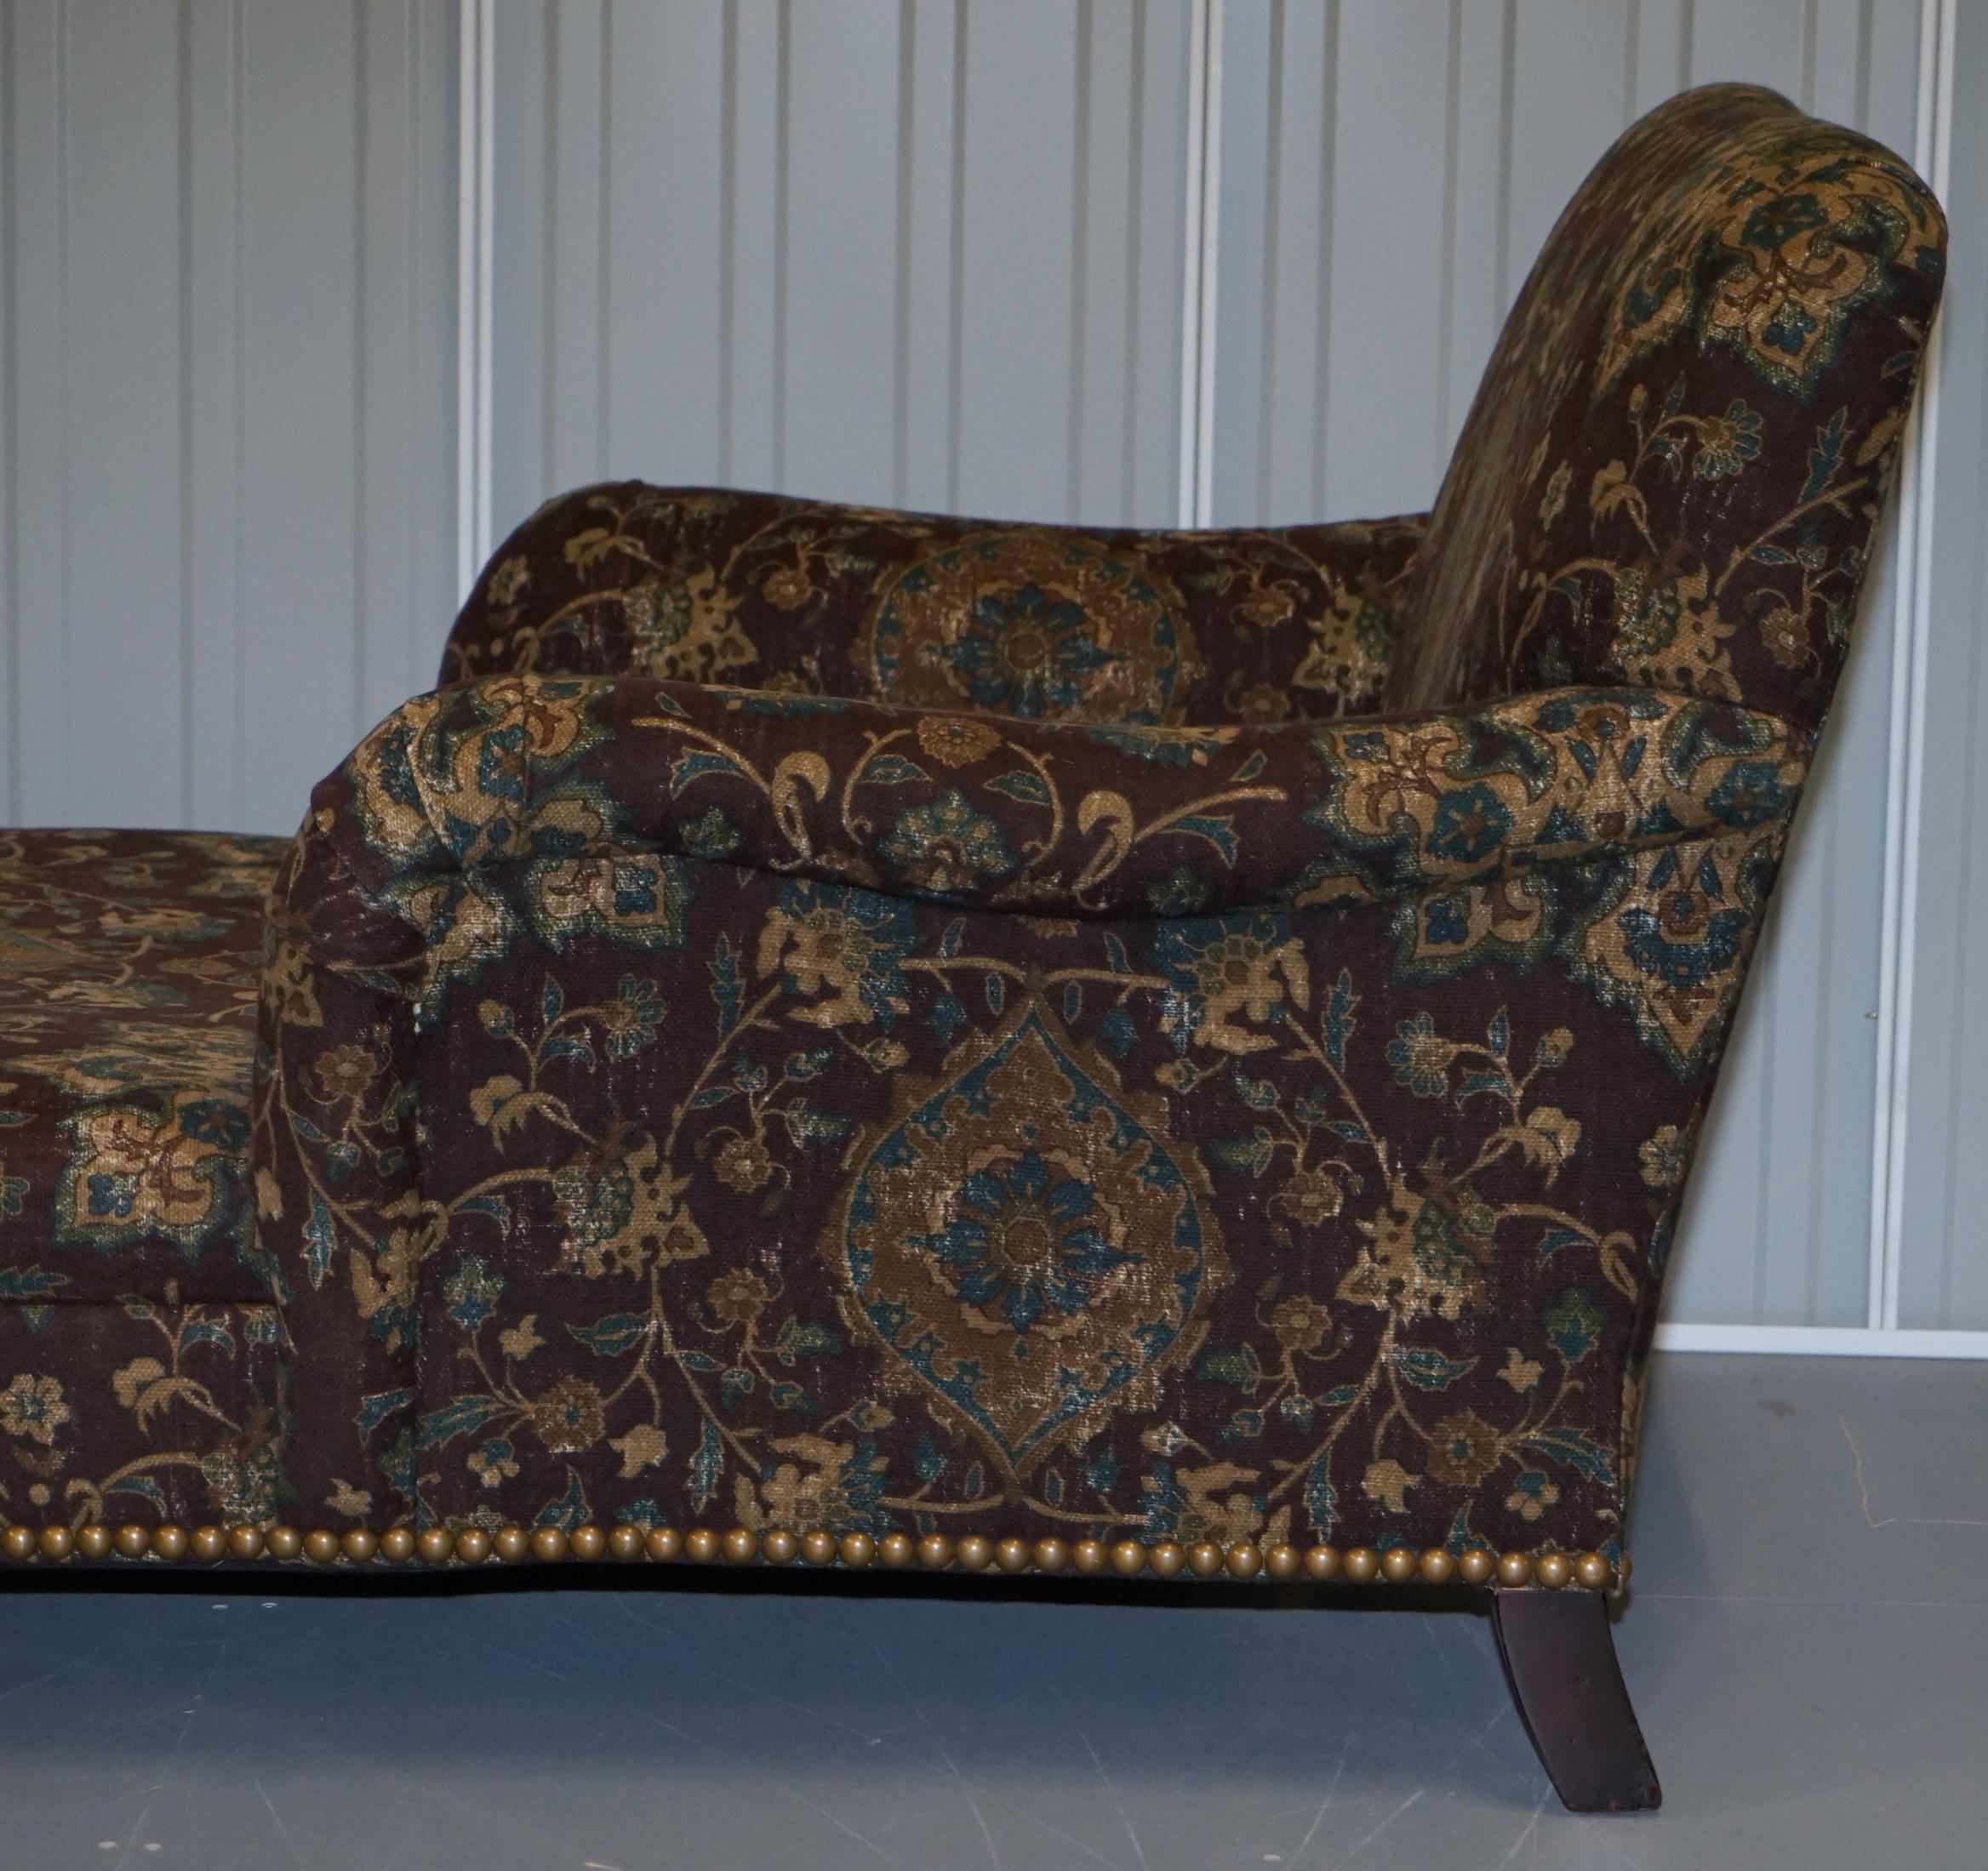 Large Oversized Ralph Lauren Chaise Lounge Sofa Armchair Floral Upholstery 10